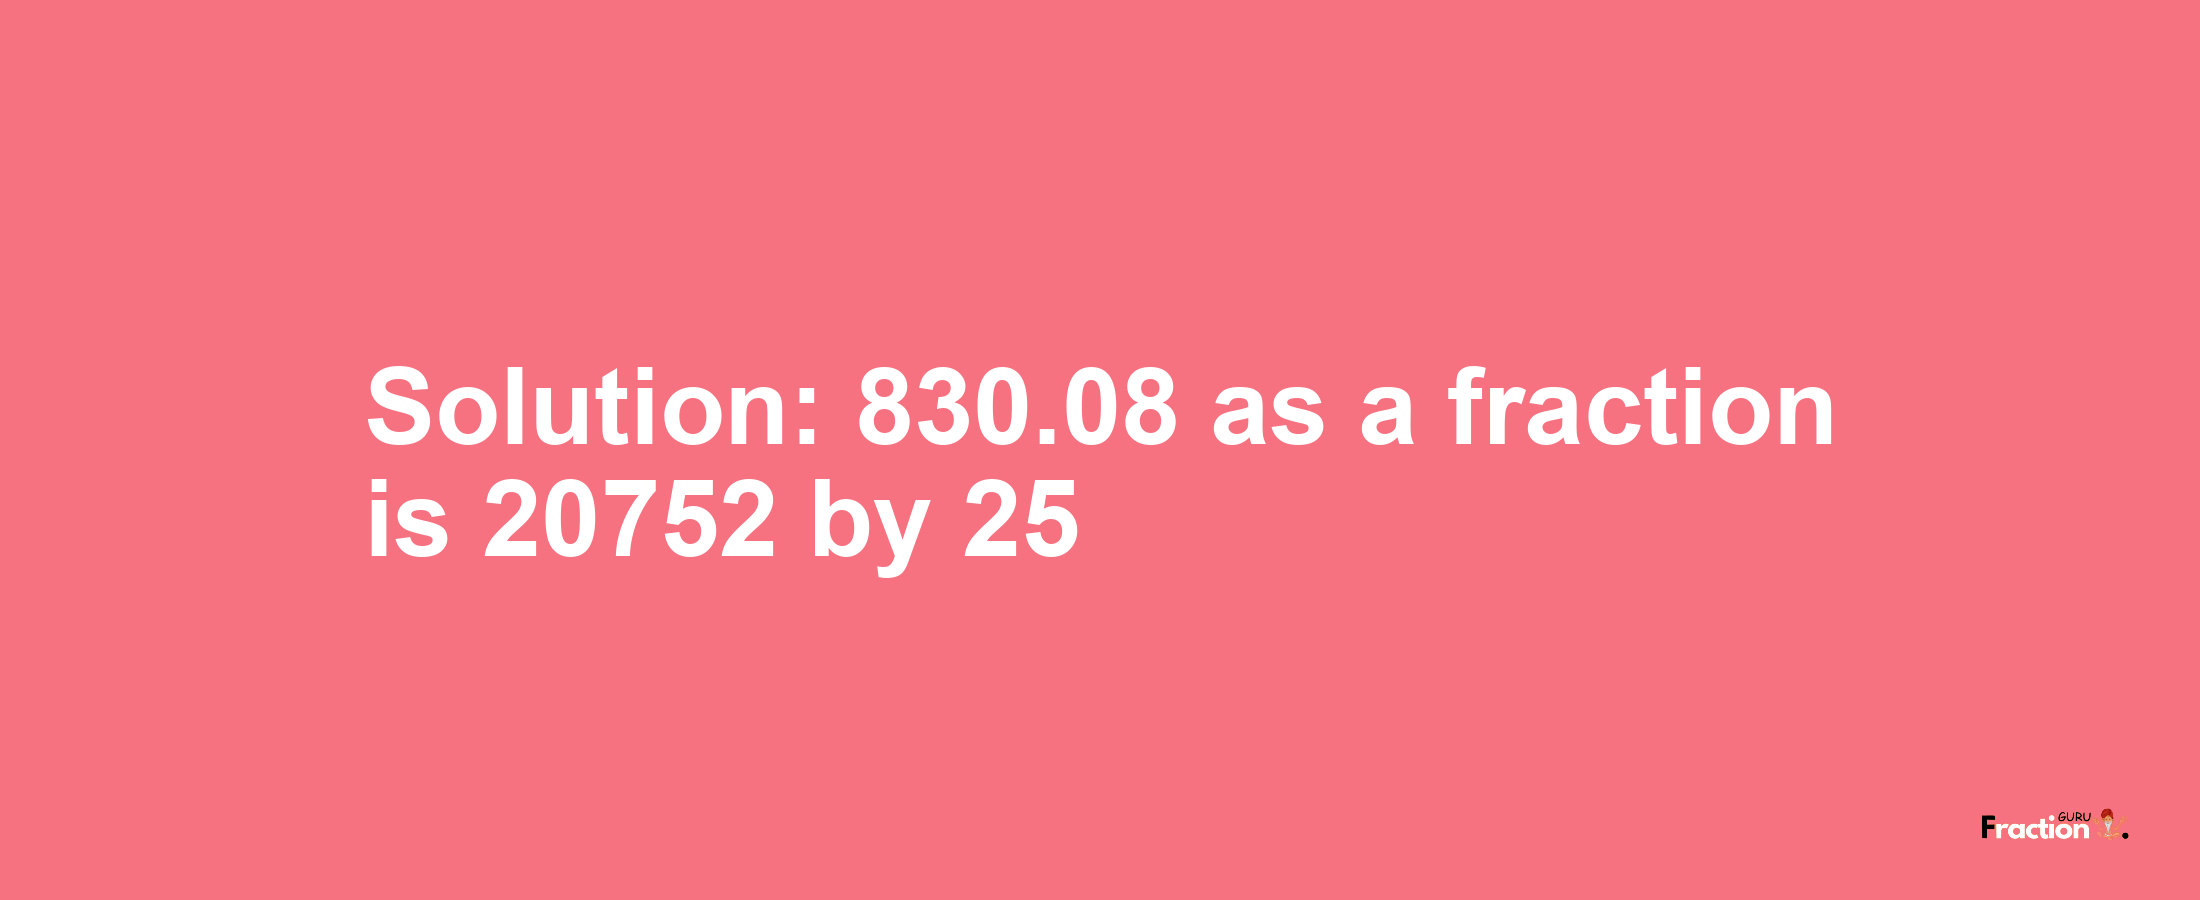 Solution:830.08 as a fraction is 20752/25